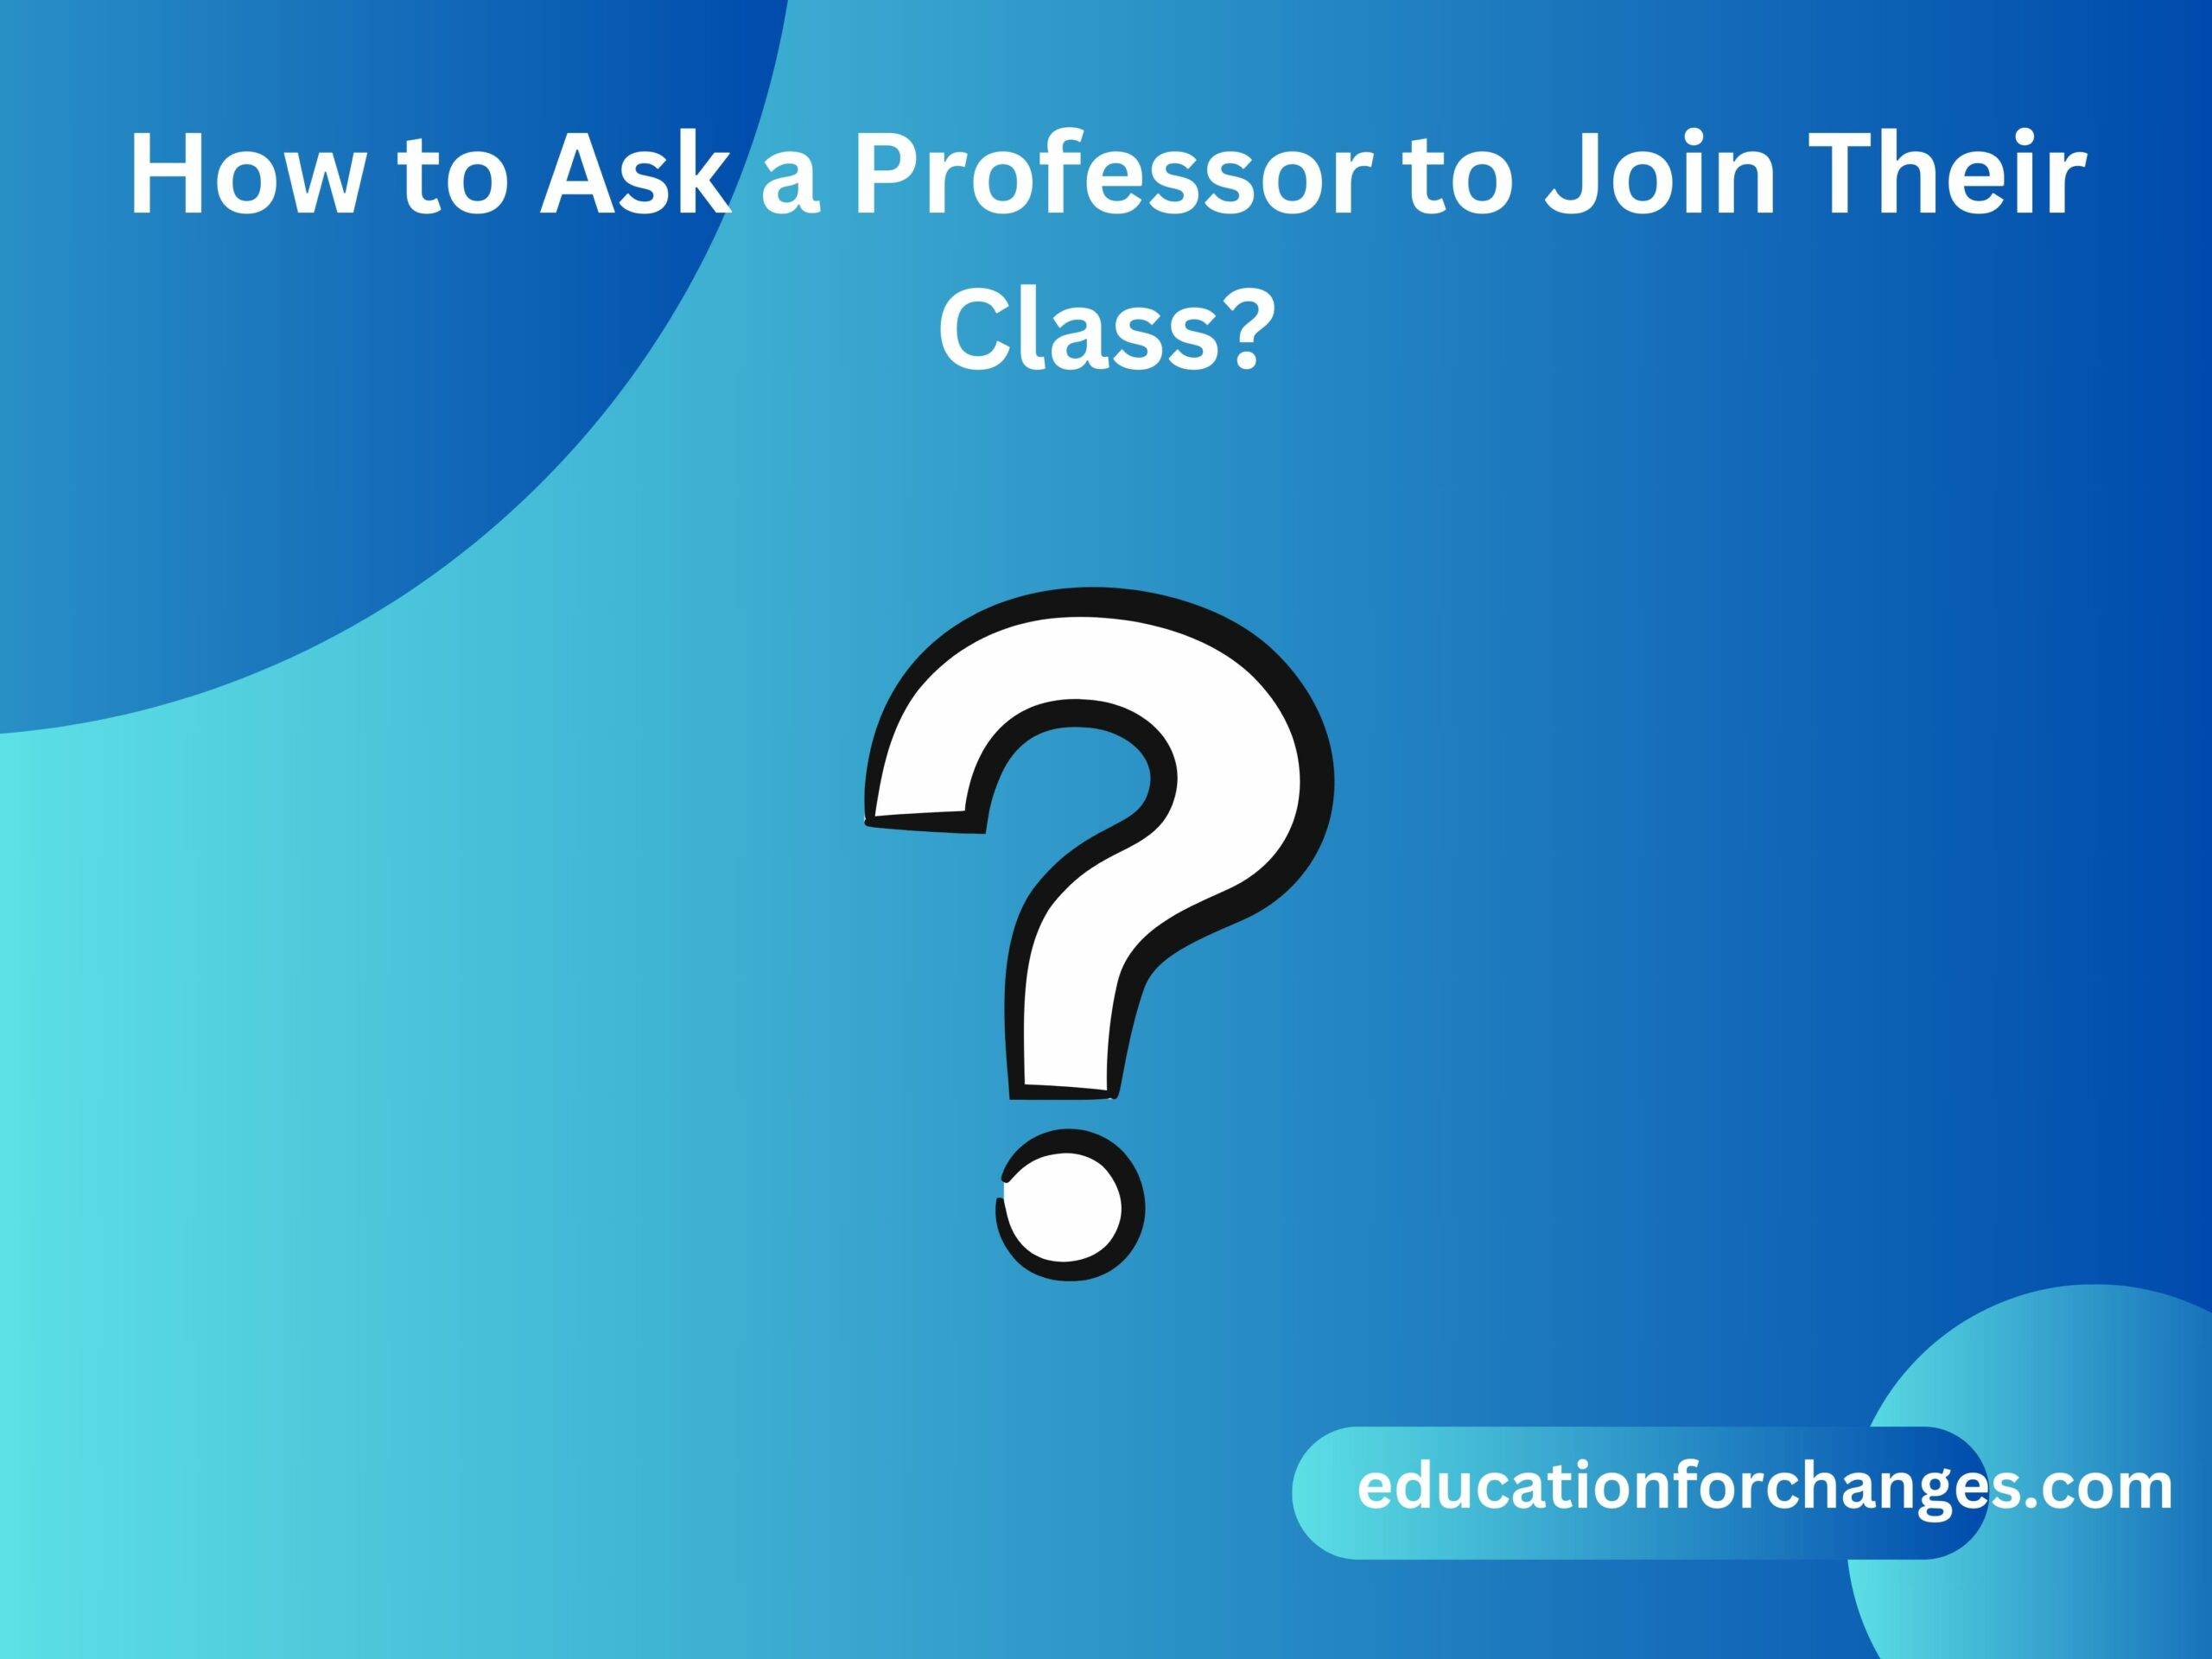 How to Ask a Professor to Join Their Class